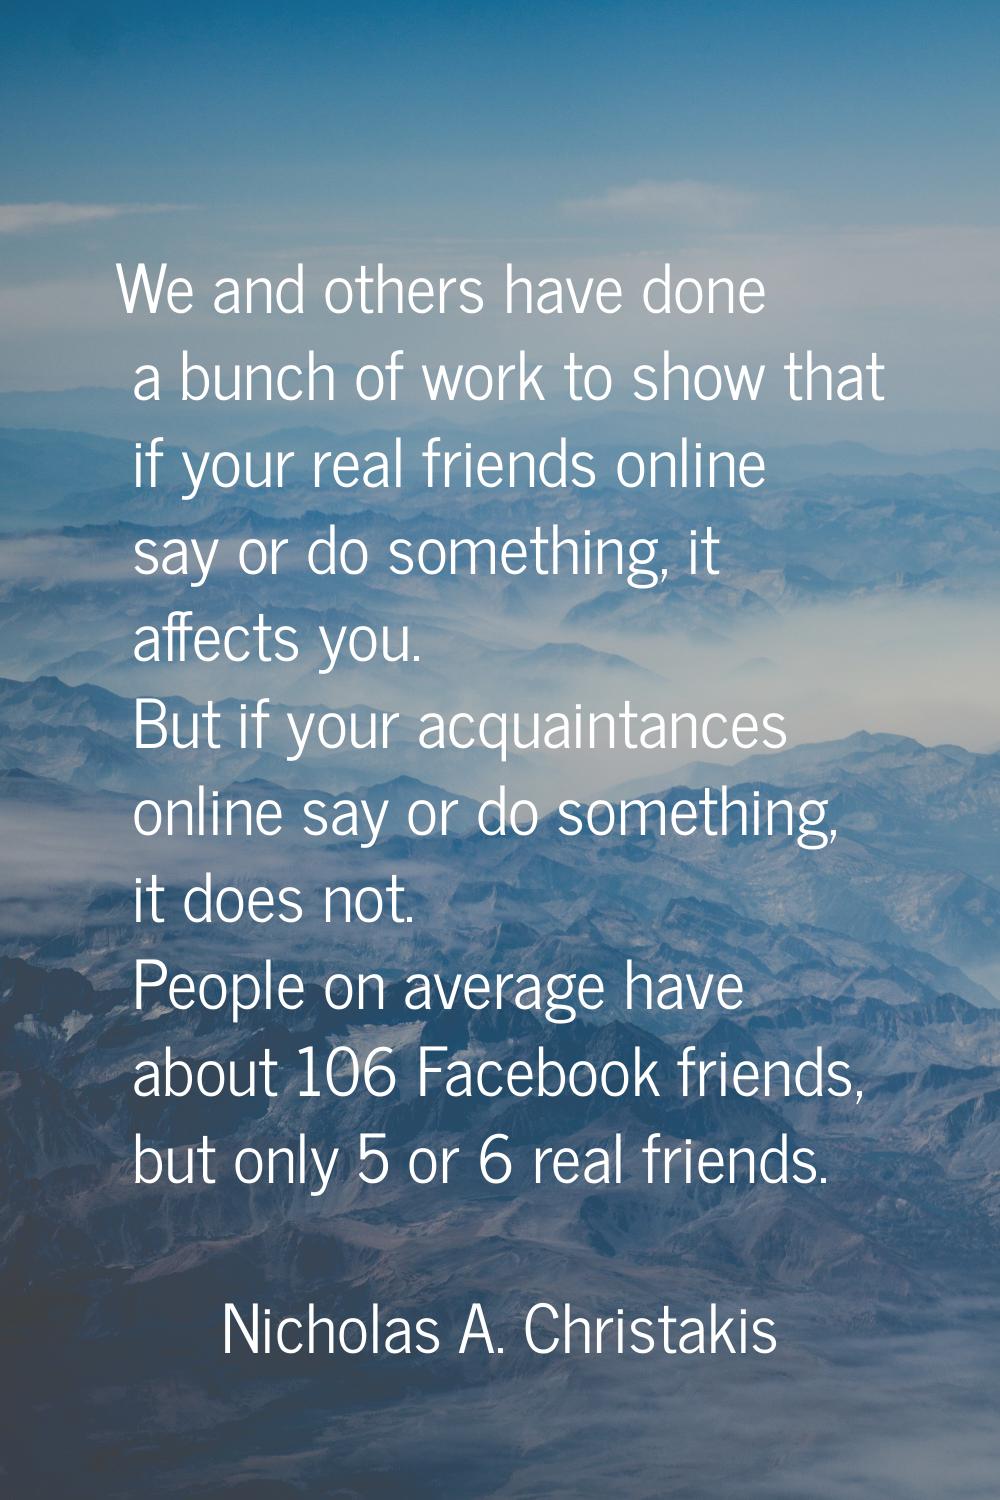 We and others have done a bunch of work to show that if your real friends online say or do somethin